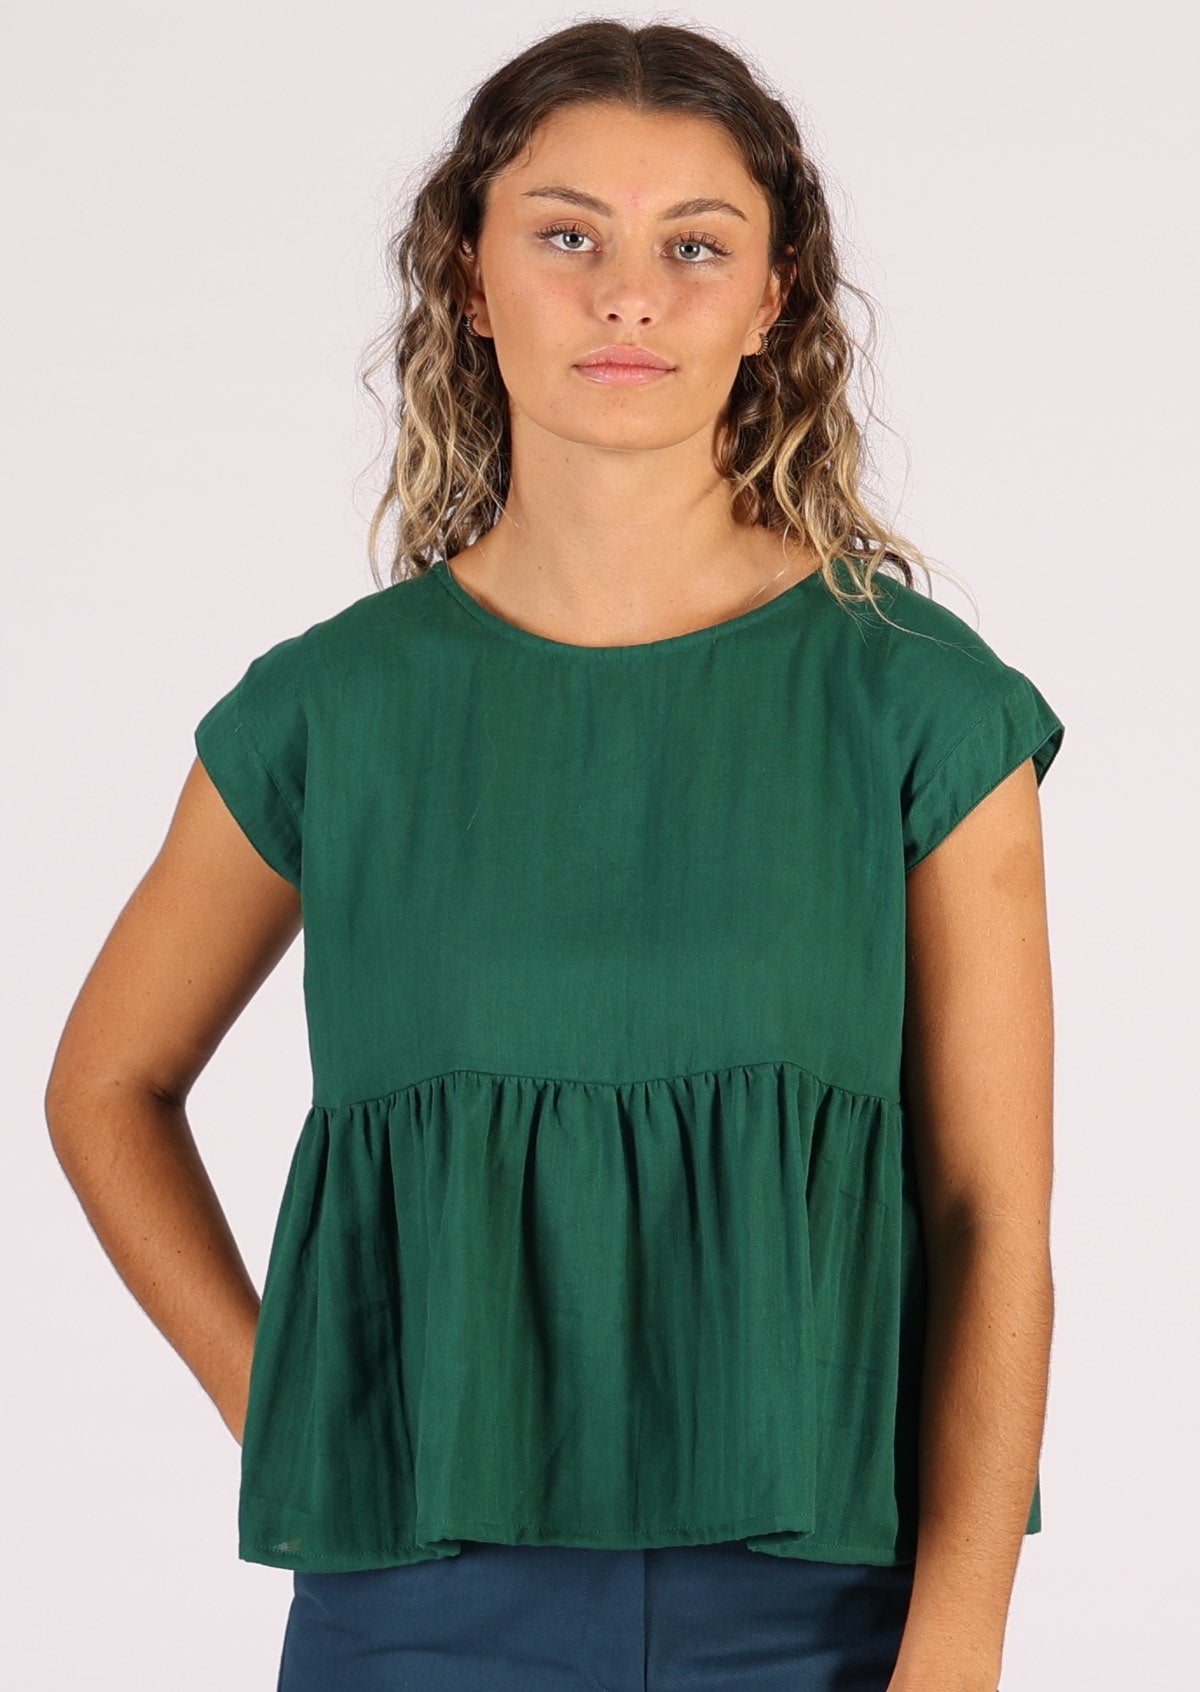 Cotton gauze relaxed fit top in deep green with ruffle